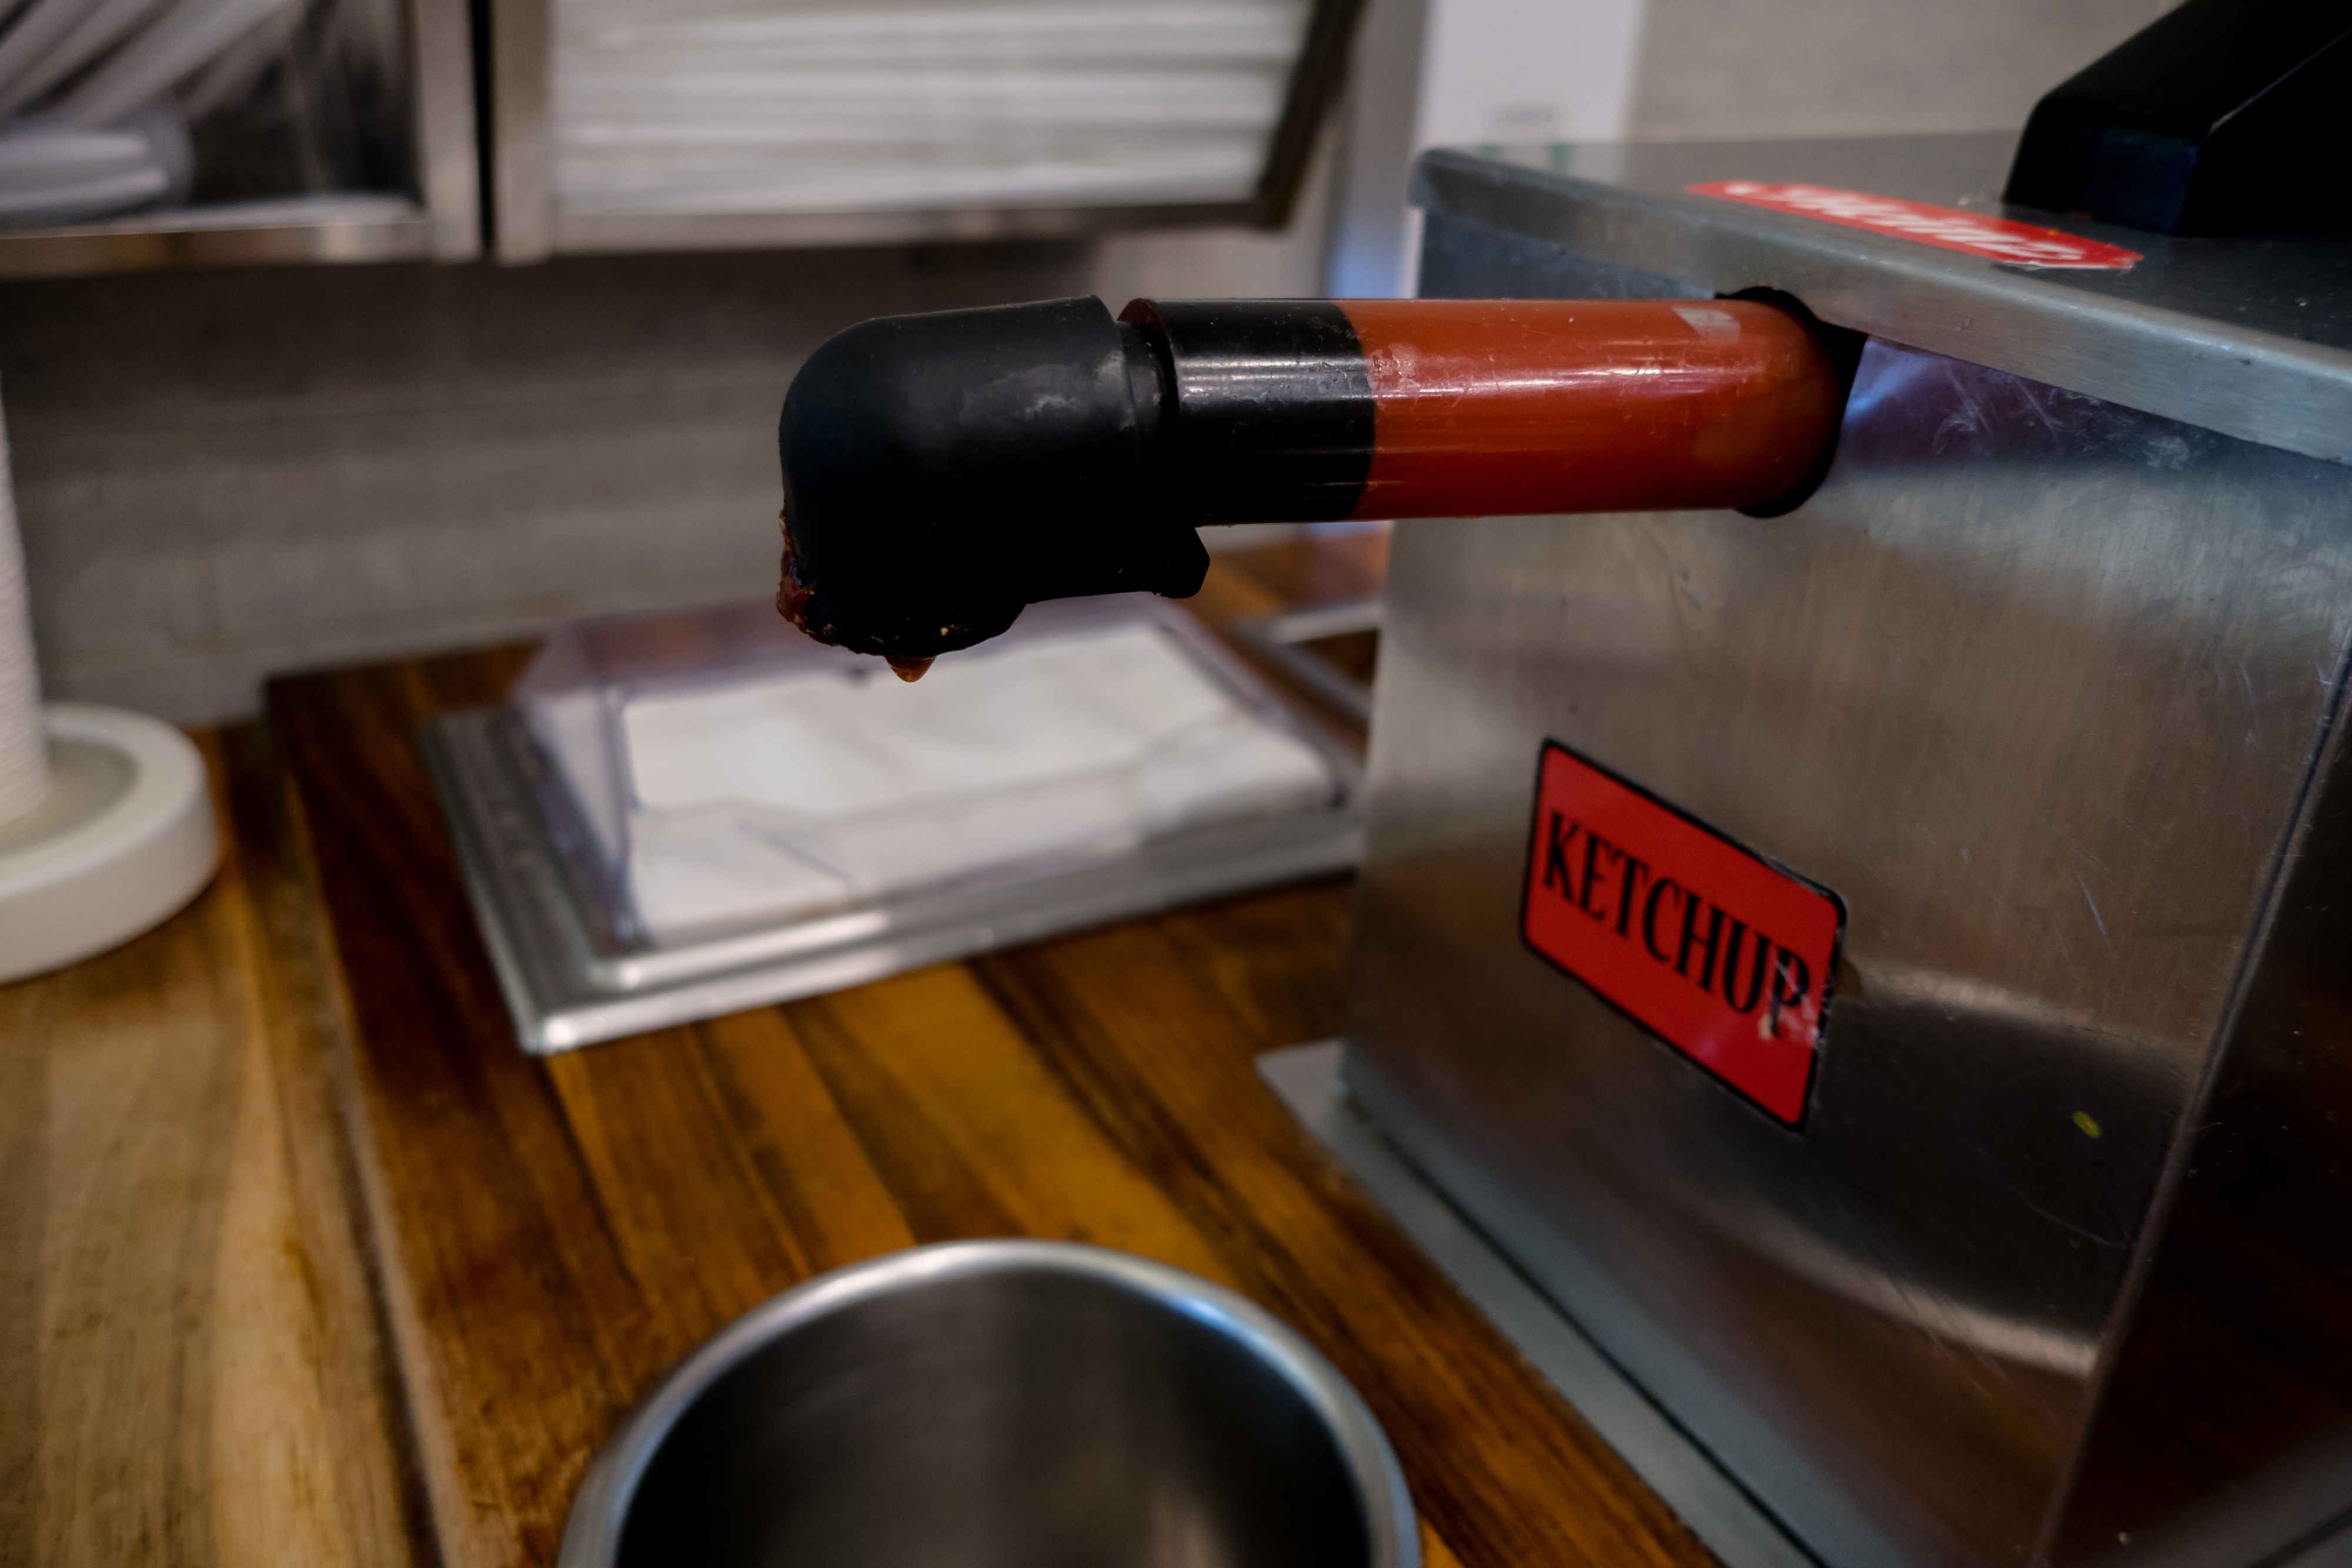 A ketchup pump dispenser with the label &quot;KETCHUP&quot; on it, positioned over a stainless steel container